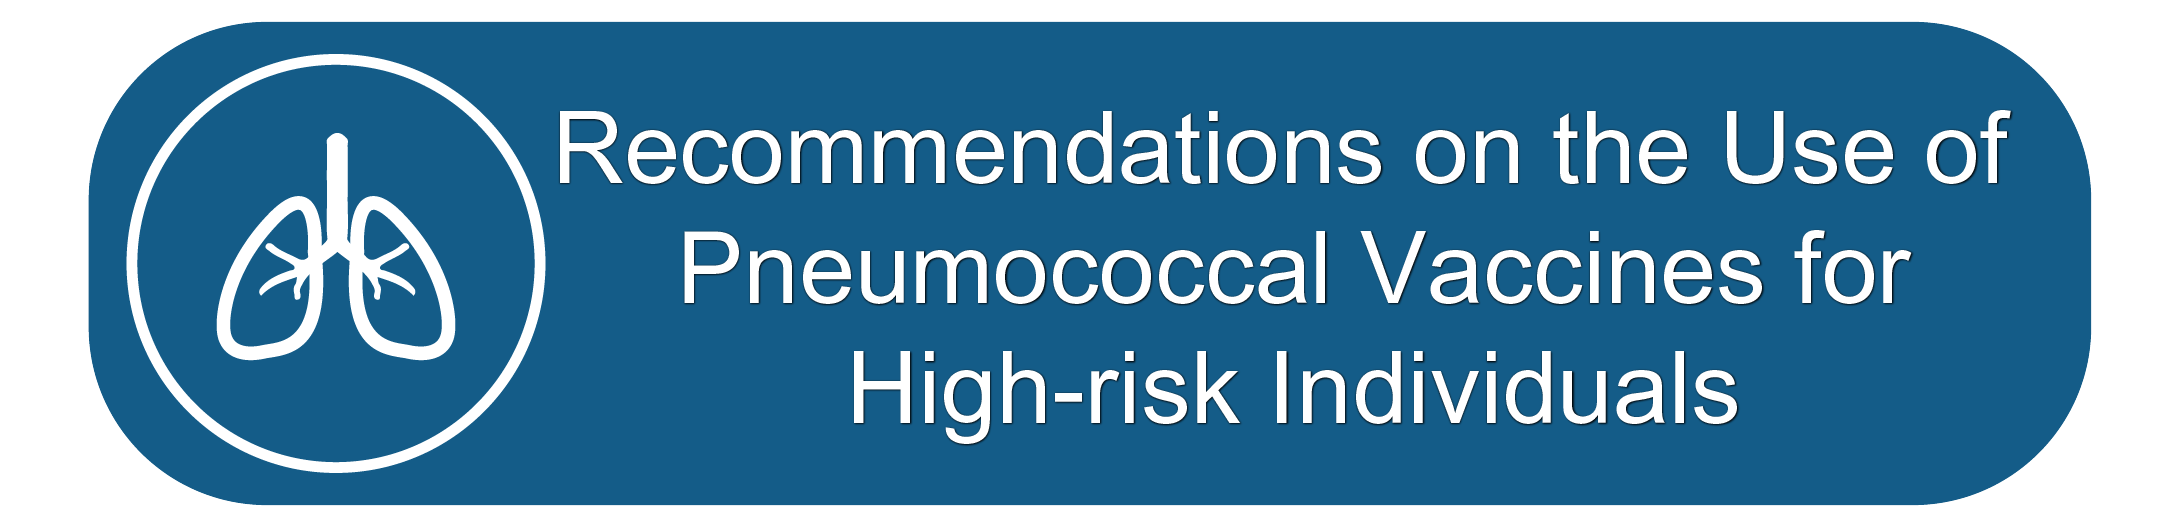 Recommendations on the Use of Pneumococcal Vaccines for High-risk Individuals